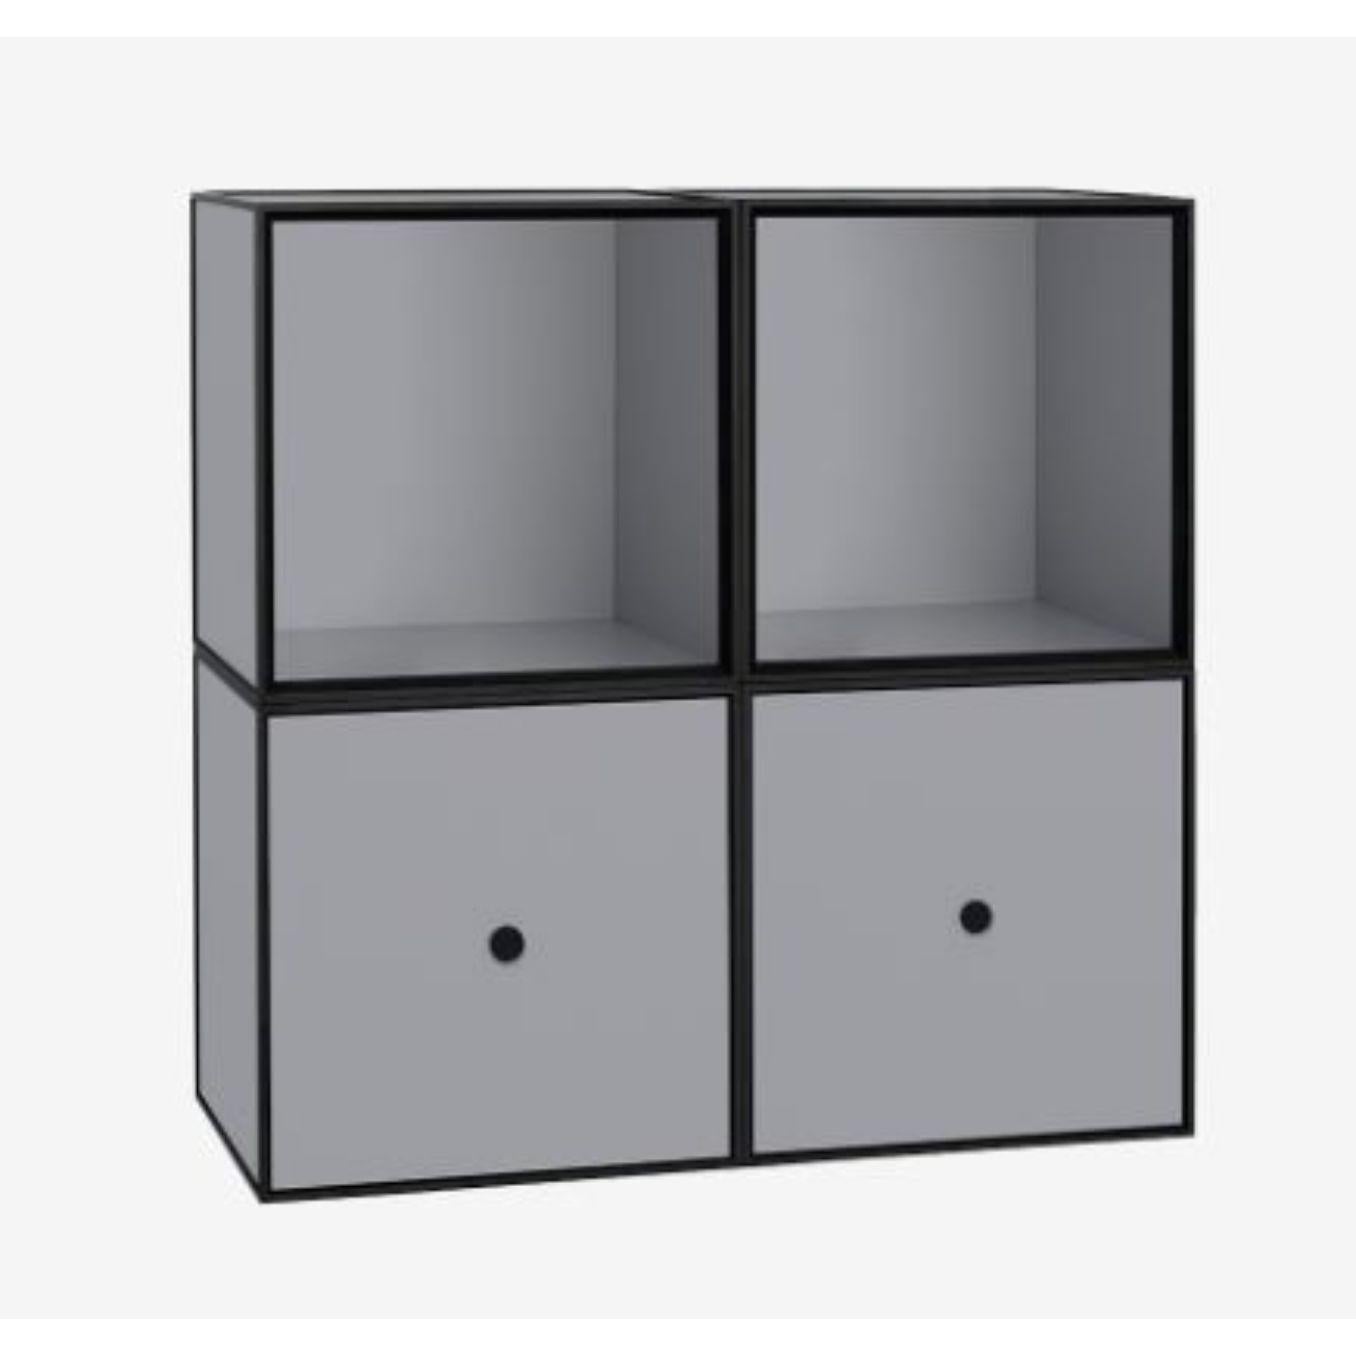 35 dark grey frame square standard box by Lassen.
Dimensions: D 70 x W 35 x H 70 cm. 
Materials: Finér, Melamin, Melamine, Metal, Veneer.
Also available in different colors and dimensions. 
Weight: 23.74 Kg

By Lassen is a Danish design brand